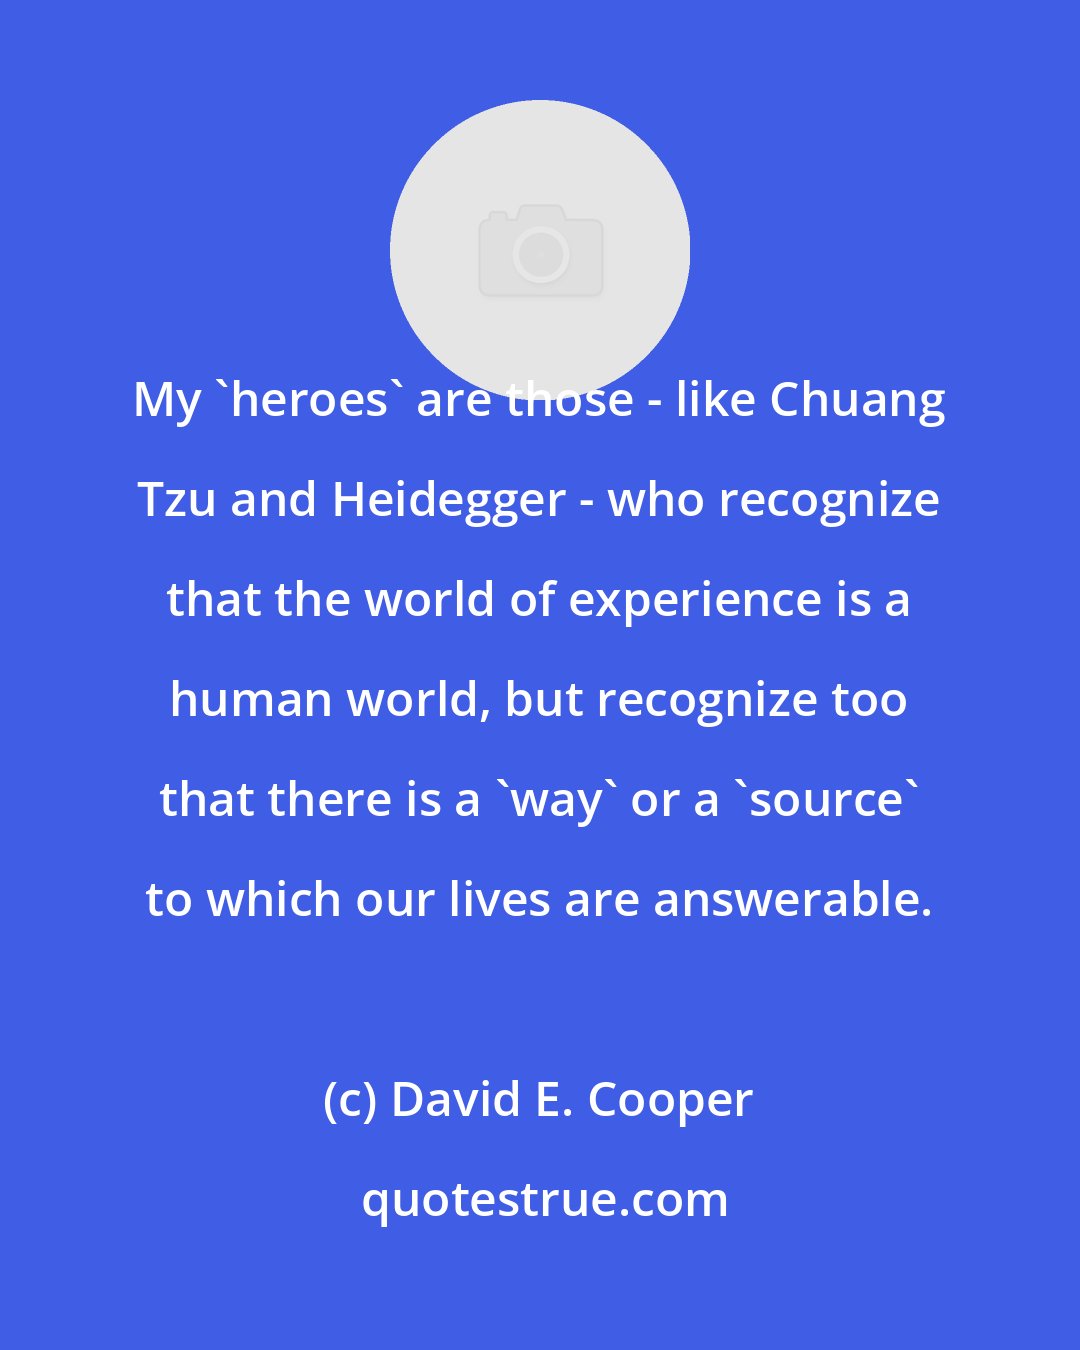 David E. Cooper: My 'heroes' are those - like Chuang Tzu and Heidegger - who recognize that the world of experience is a human world, but recognize too that there is a 'way' or a 'source' to which our lives are answerable.